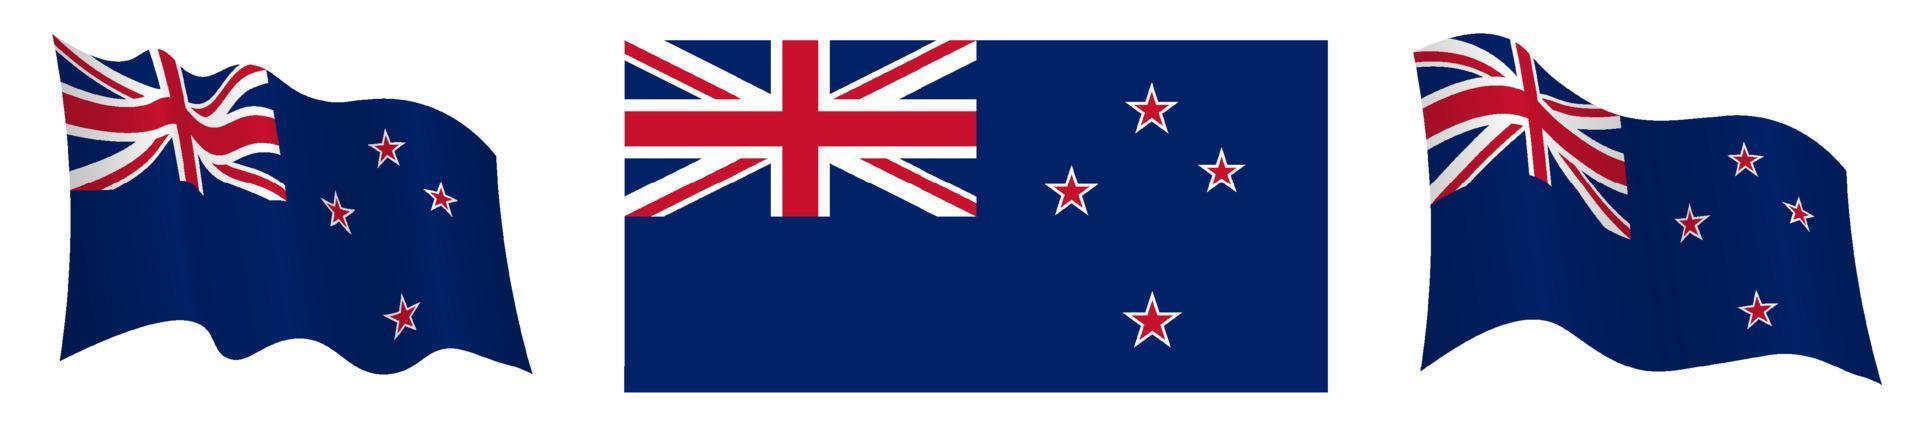 Flag of New zealand in static position and in motion, fluttering in the wind in exact colors and sizes, on white background vector